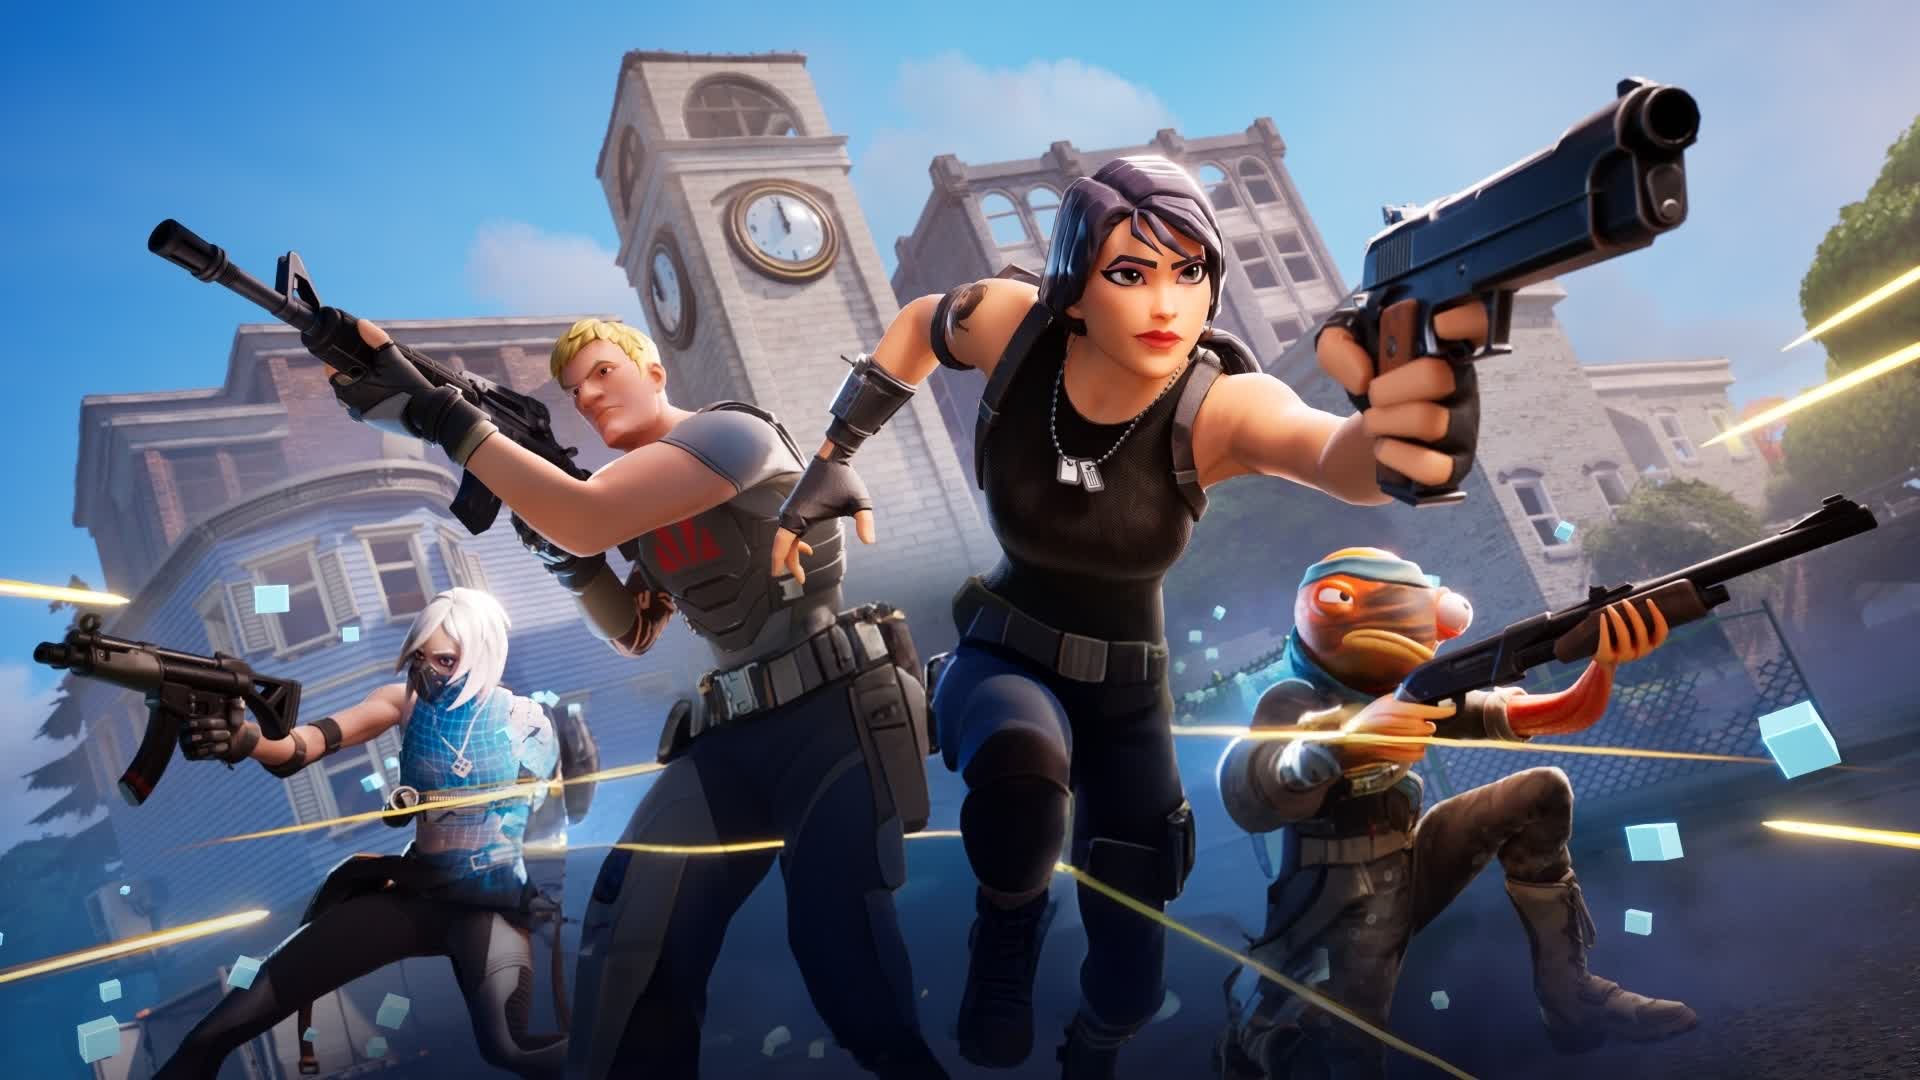 Fortnite is coming to AltStore PAL on iPhone in the EU